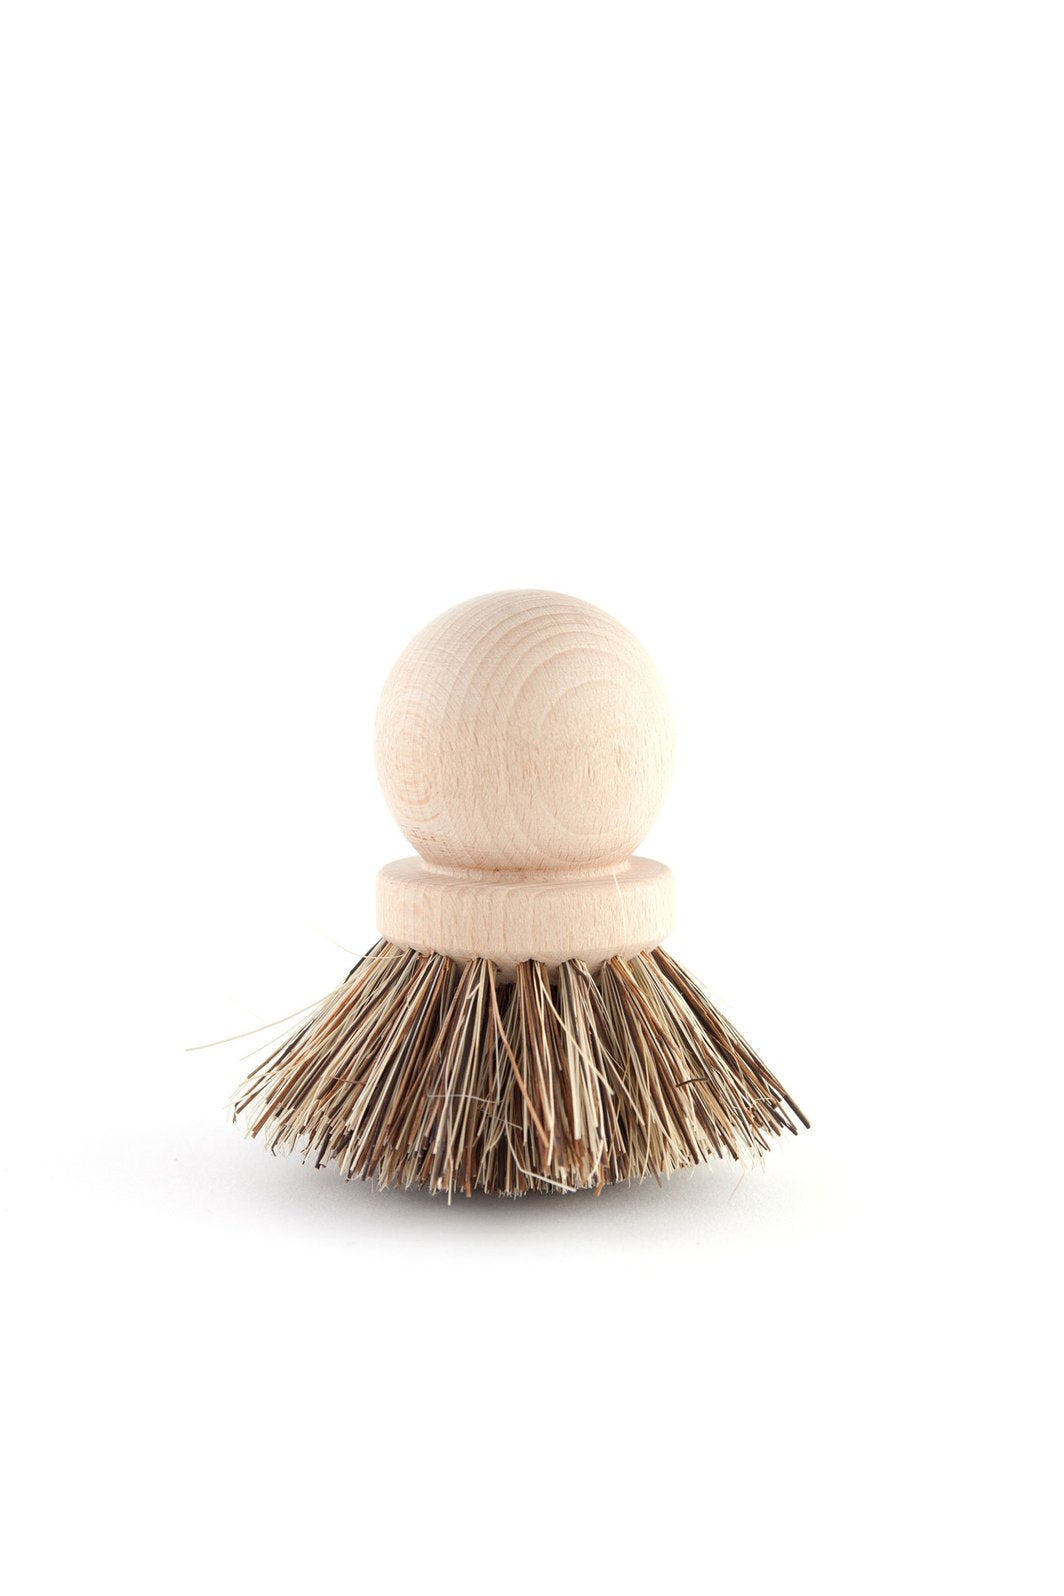 A small, round Andrée Jardin Tradition Saucepan Brush with stiff, natural bristles, isolated on a white background.